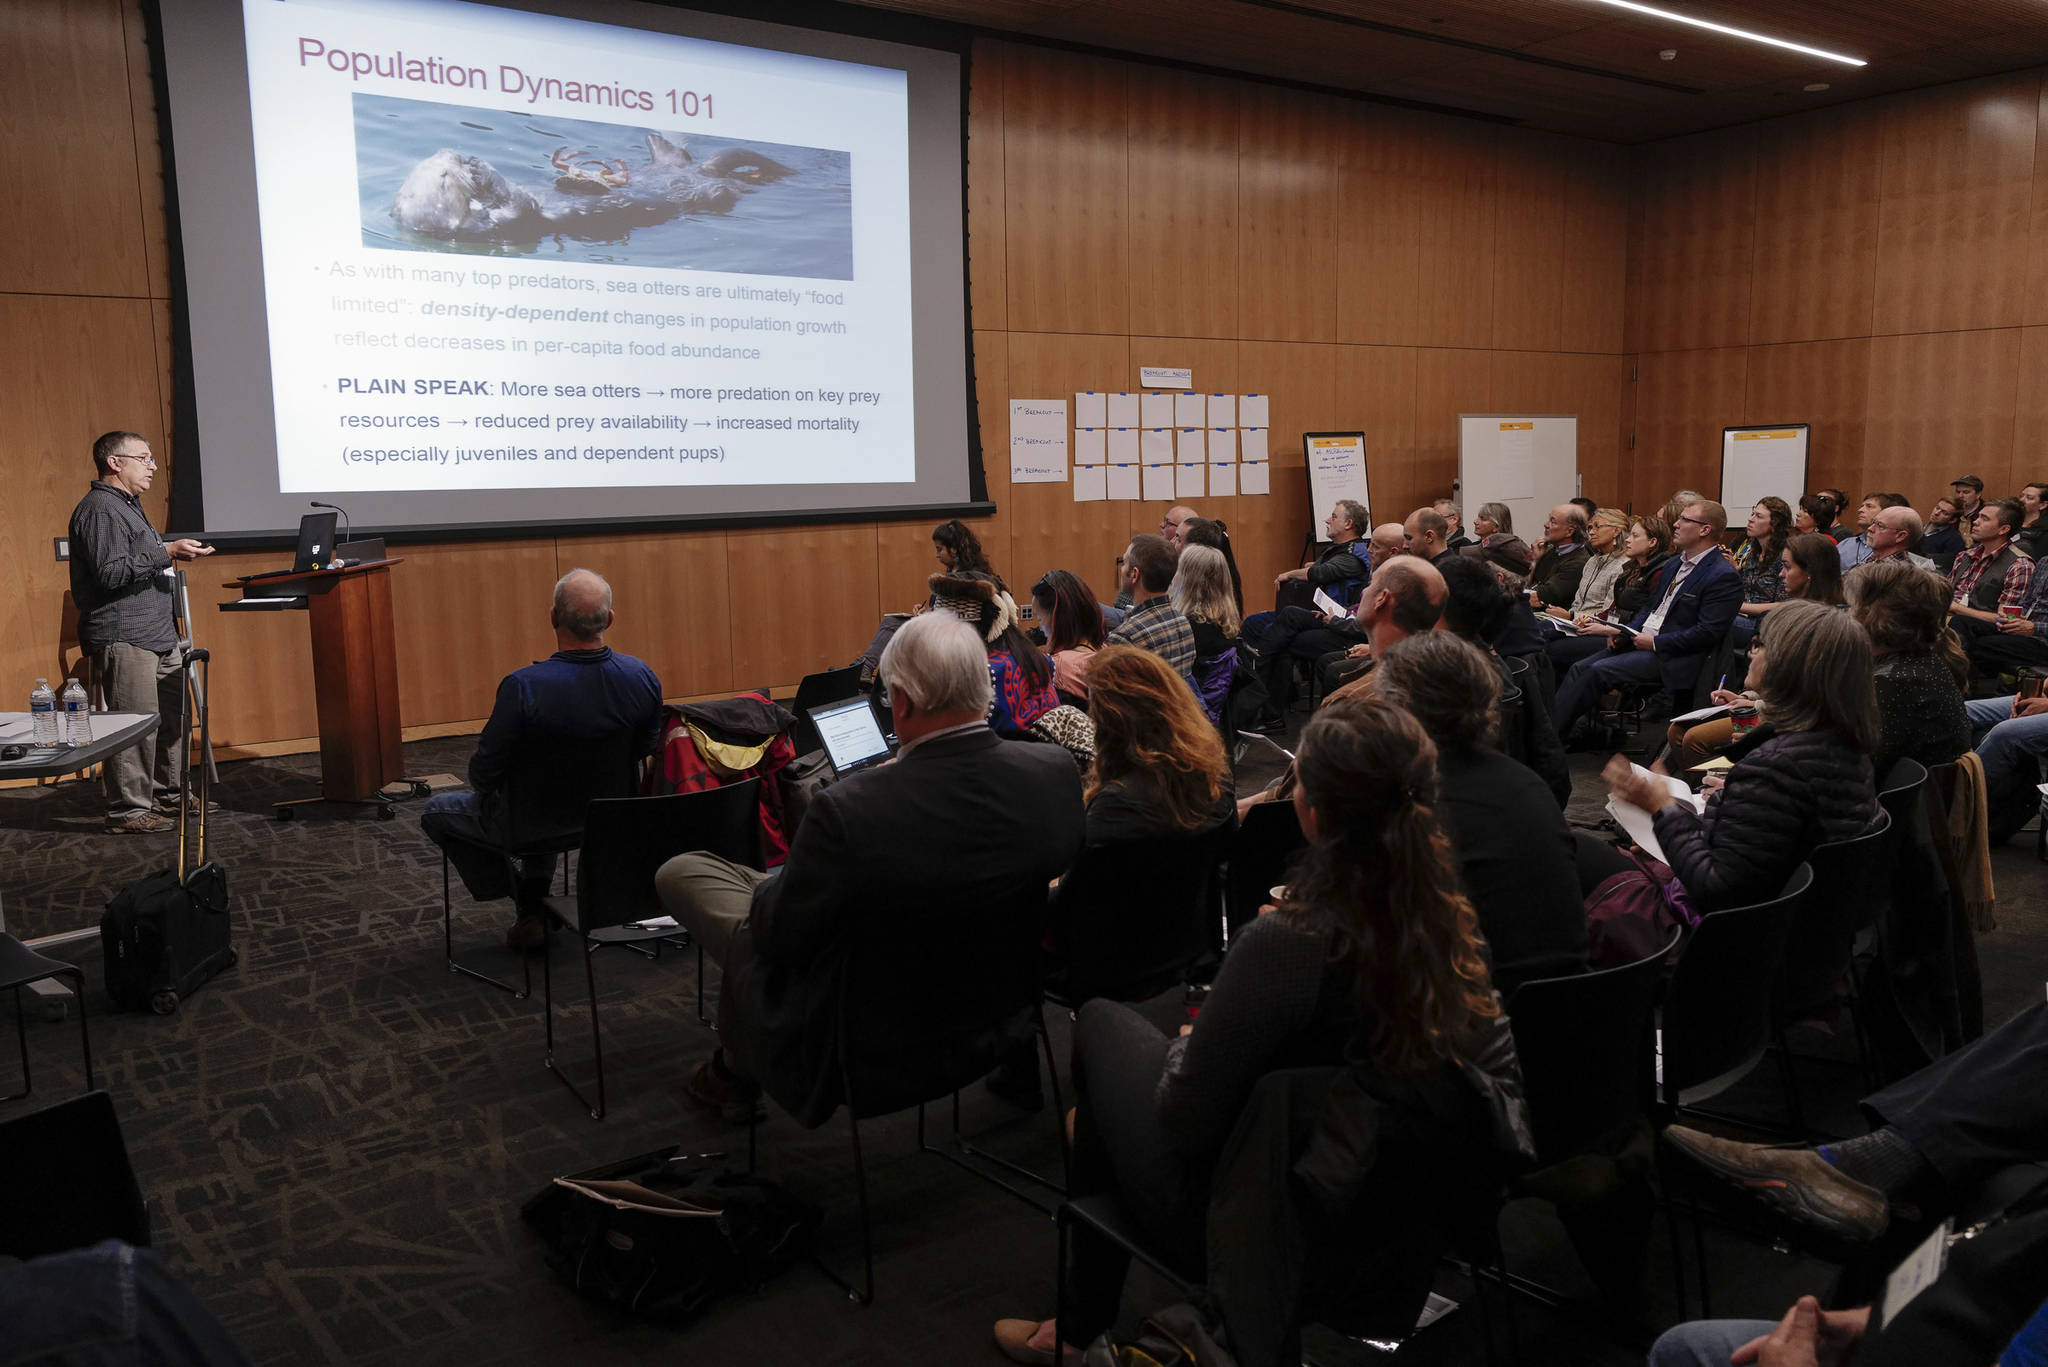 Tim Tinker with Nhydra Ecological Consulting speaks about sea otter populations in Southeast Alaska at the Southeast Sea Otter Stakeholder meeting at the Andrew P. Kashevaroff Building on Wednesday, Nov. 6, 2019. (Michael Penn | Juneau Empire)